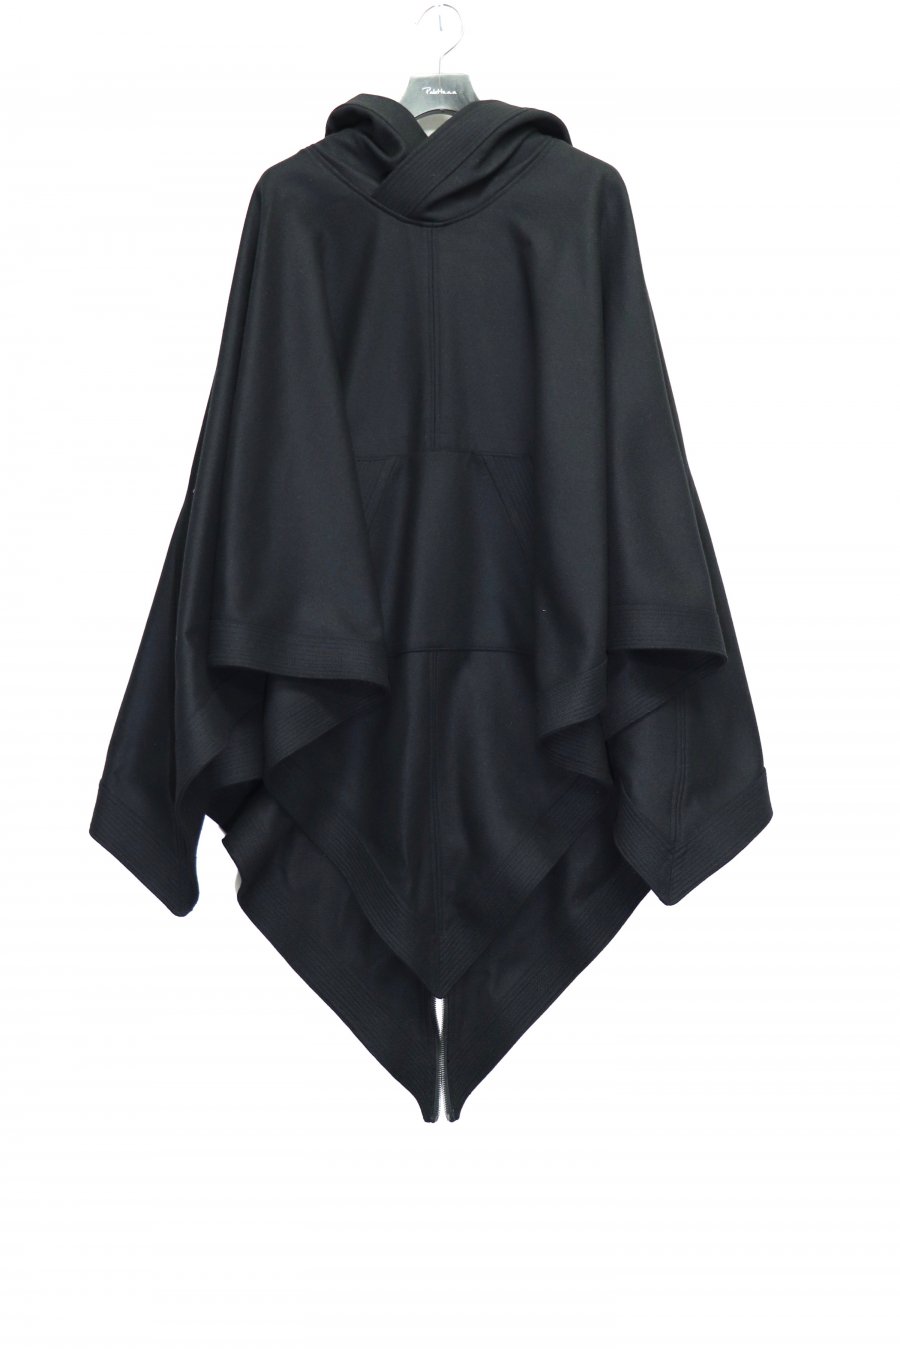 【30%OFF】［ー］MINUS  BACK ZIP CAPE<img class='new_mark_img2' src='https://img.shop-pro.jp/img/new/icons20.gif' style='border:none;display:inline;margin:0px;padding:0px;width:auto;' />